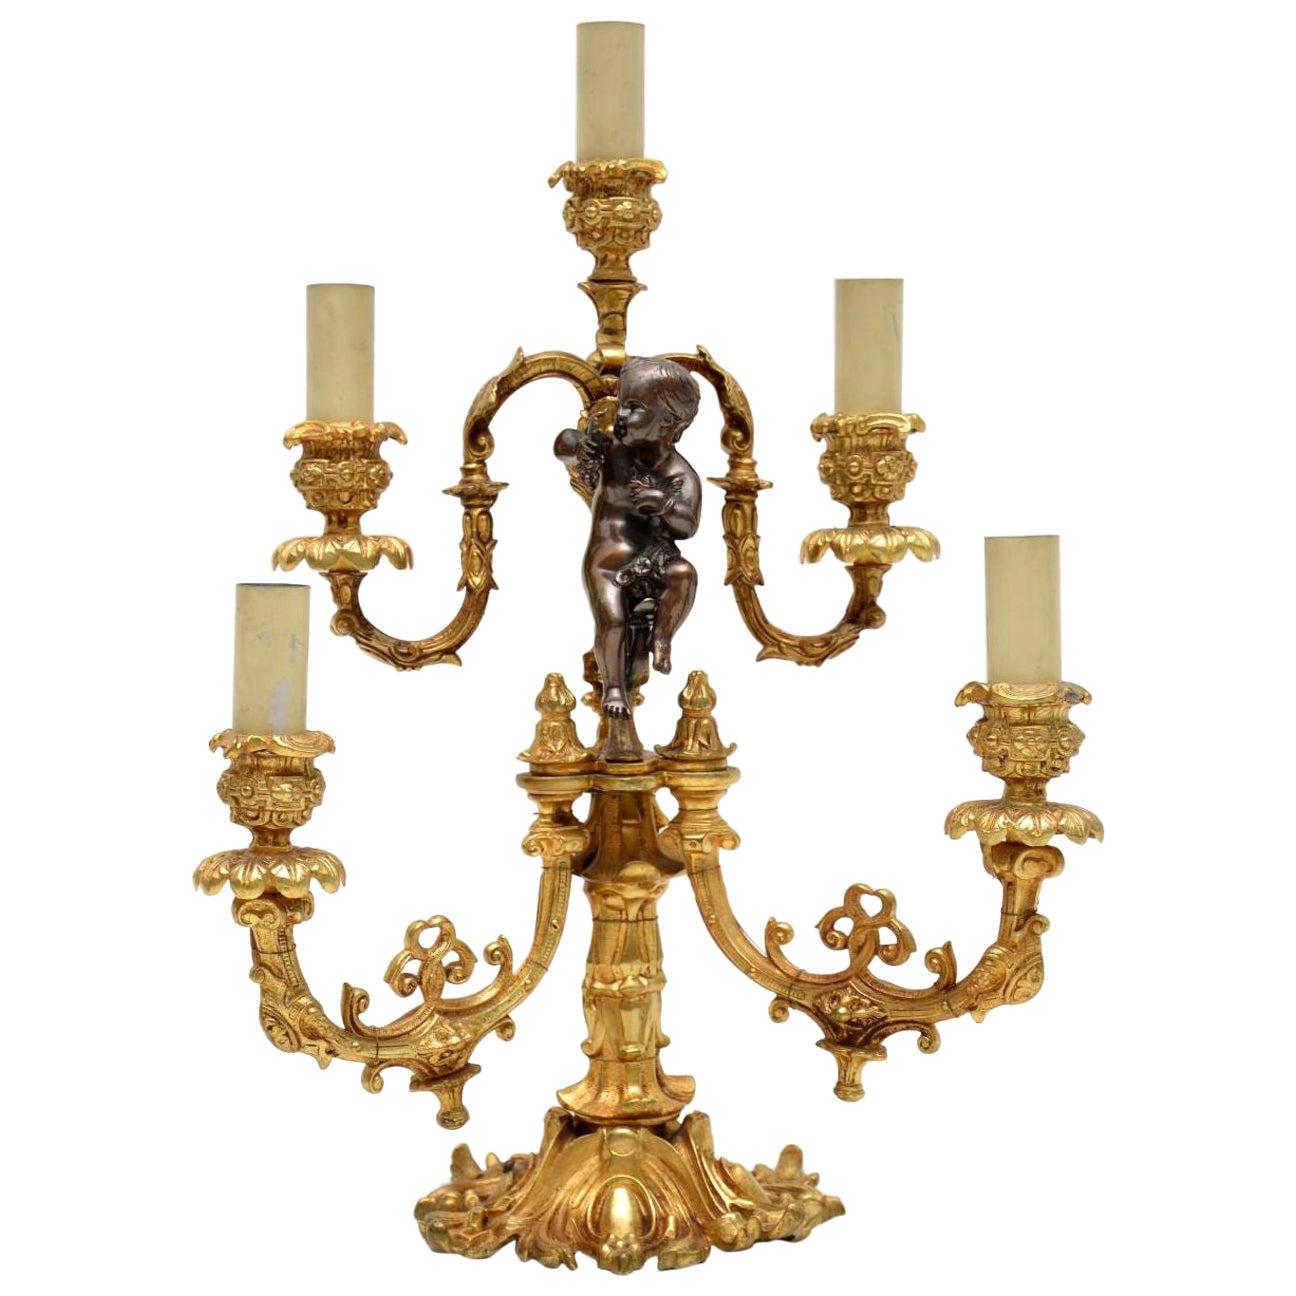 Antique French Gilt Metal Candelabra Table Lamp